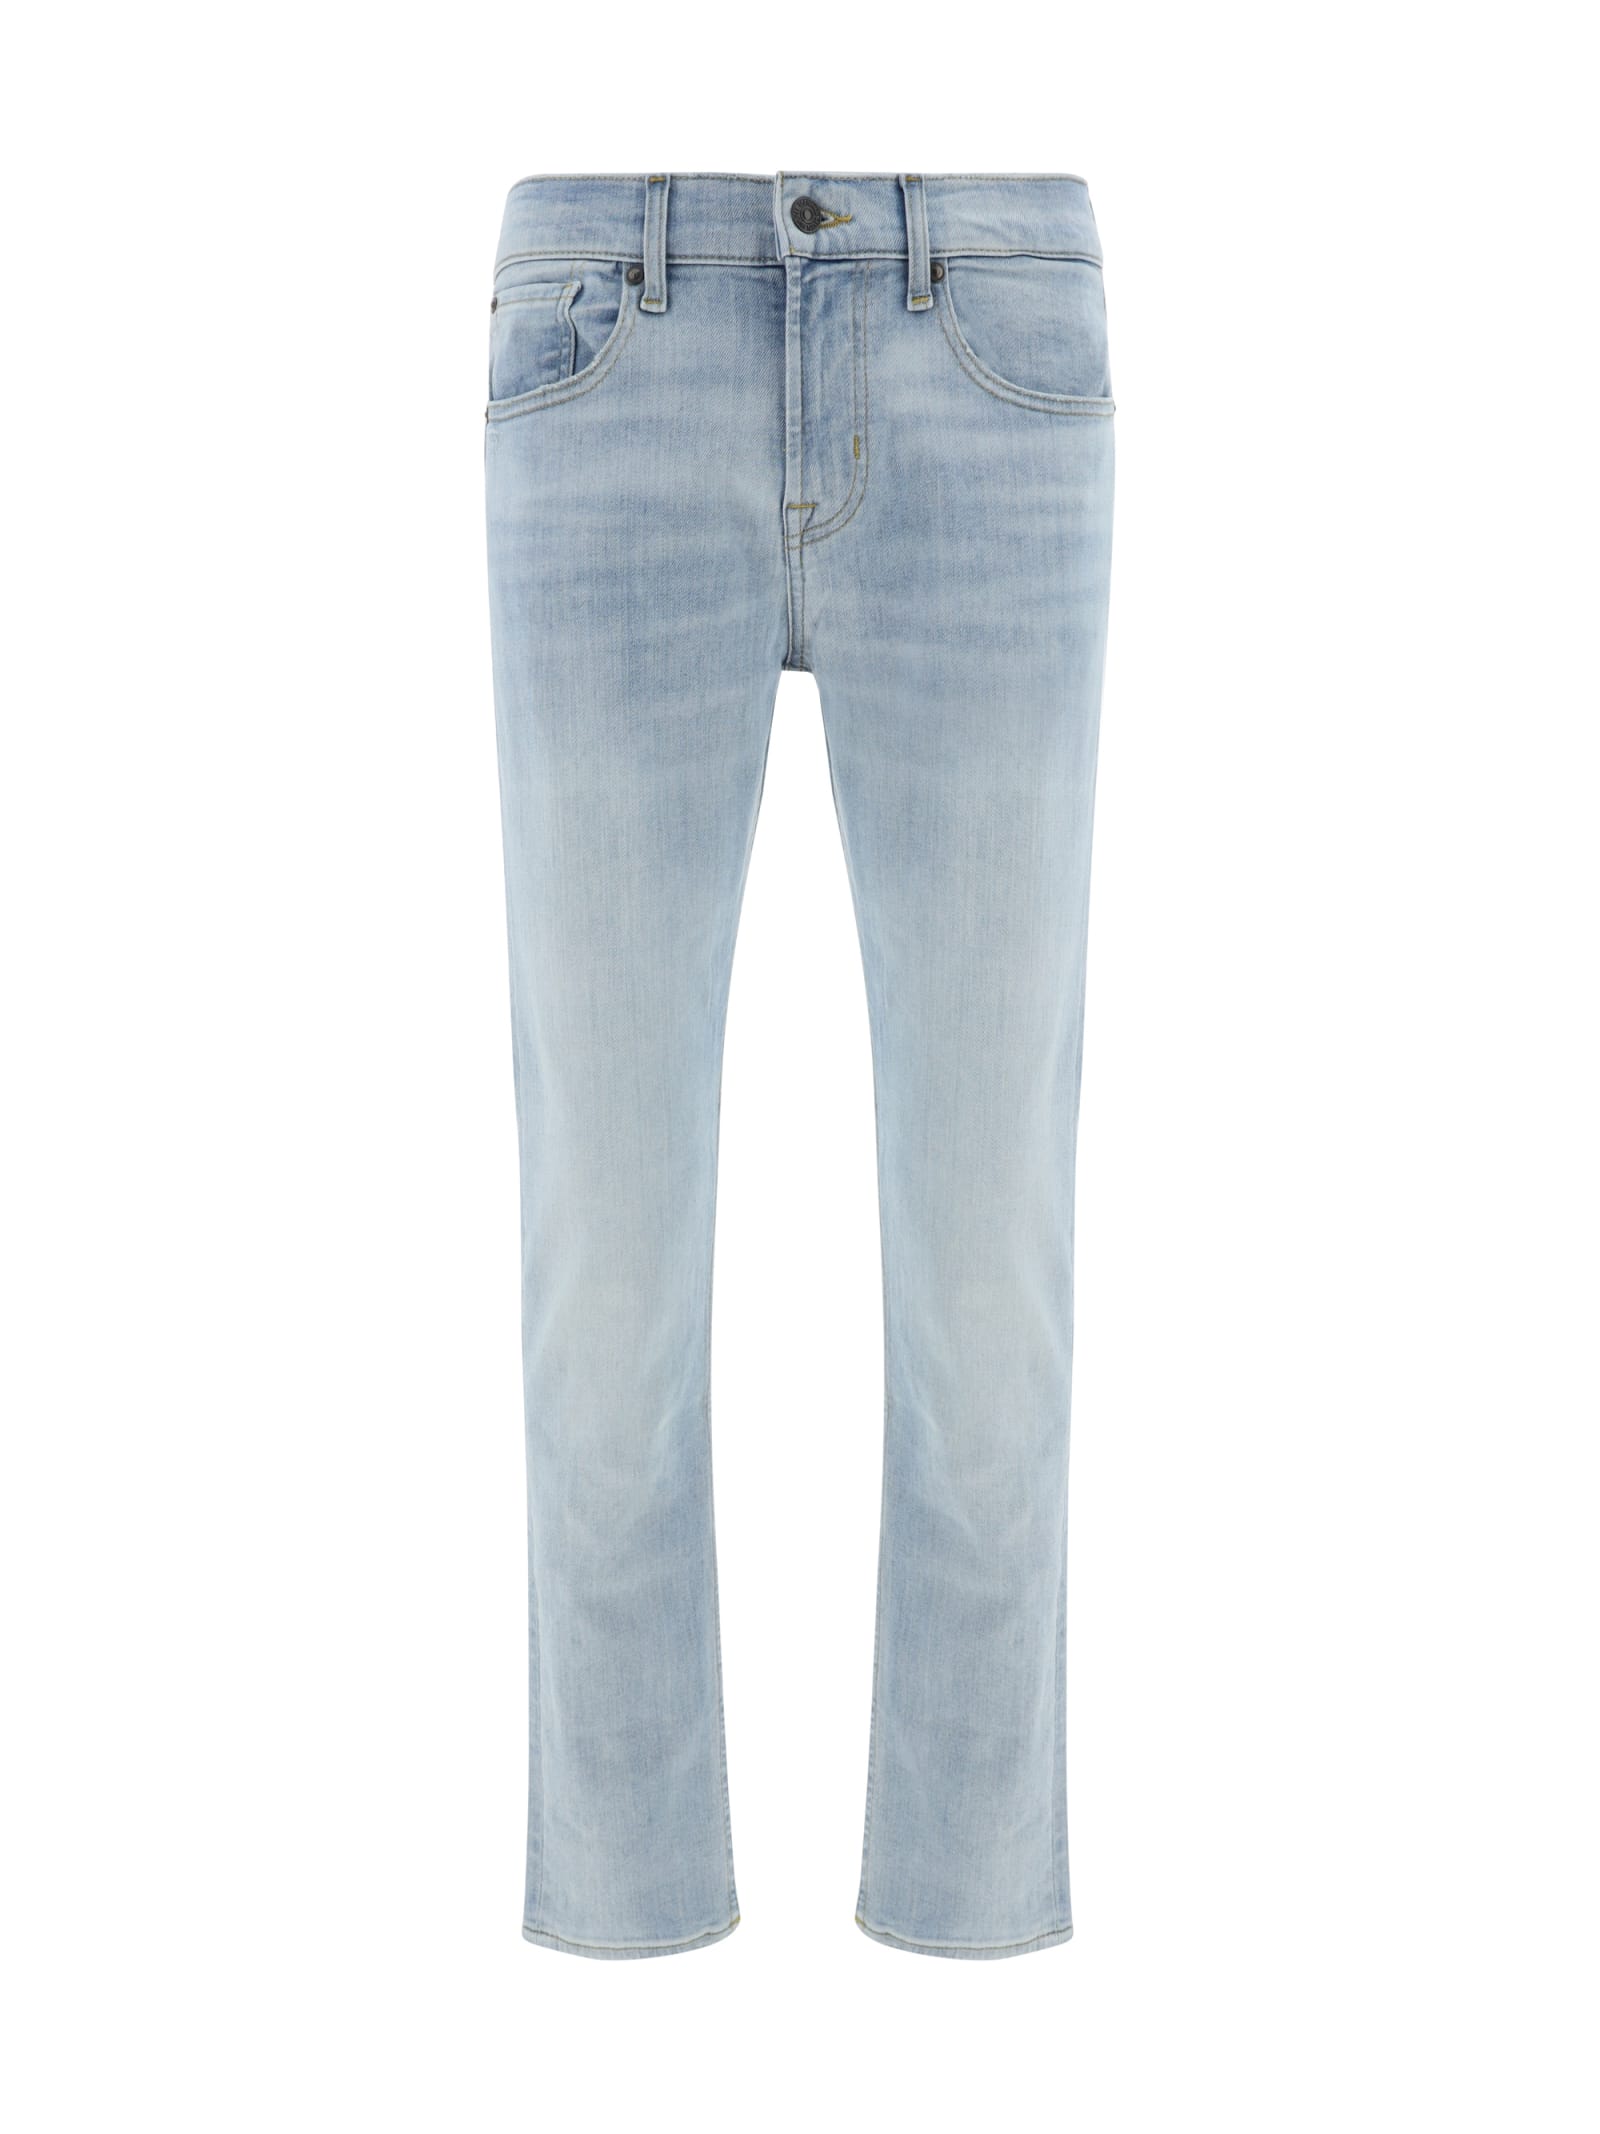 7 for all mankind jeans